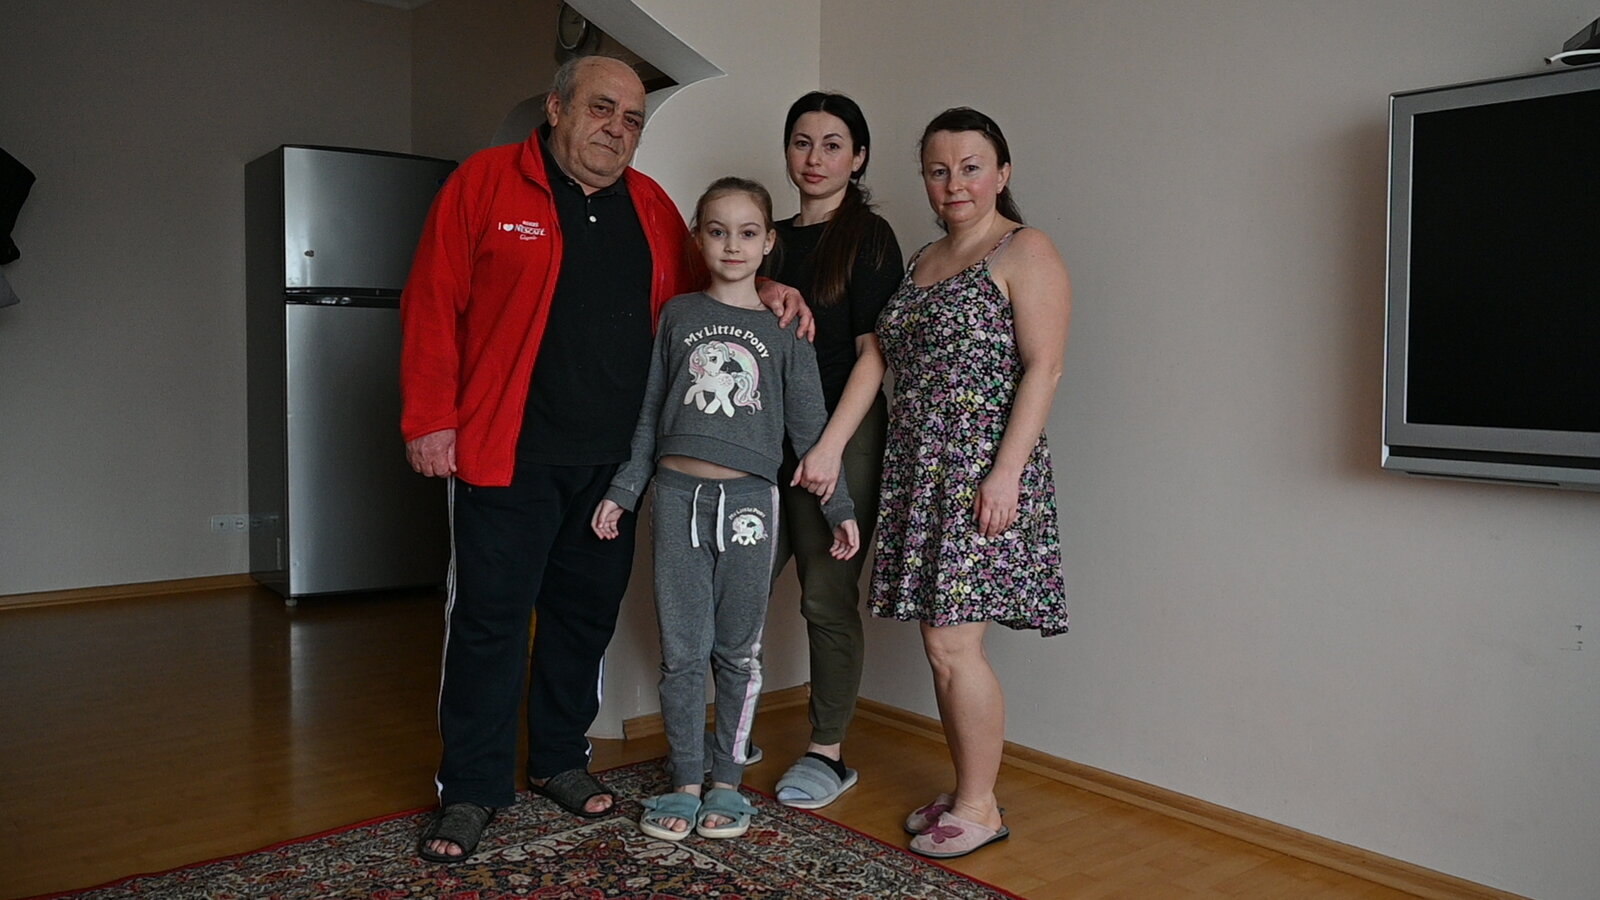 68-year-old Iurii, the father of Svetlana and Victoria, worked his entire life as a driver